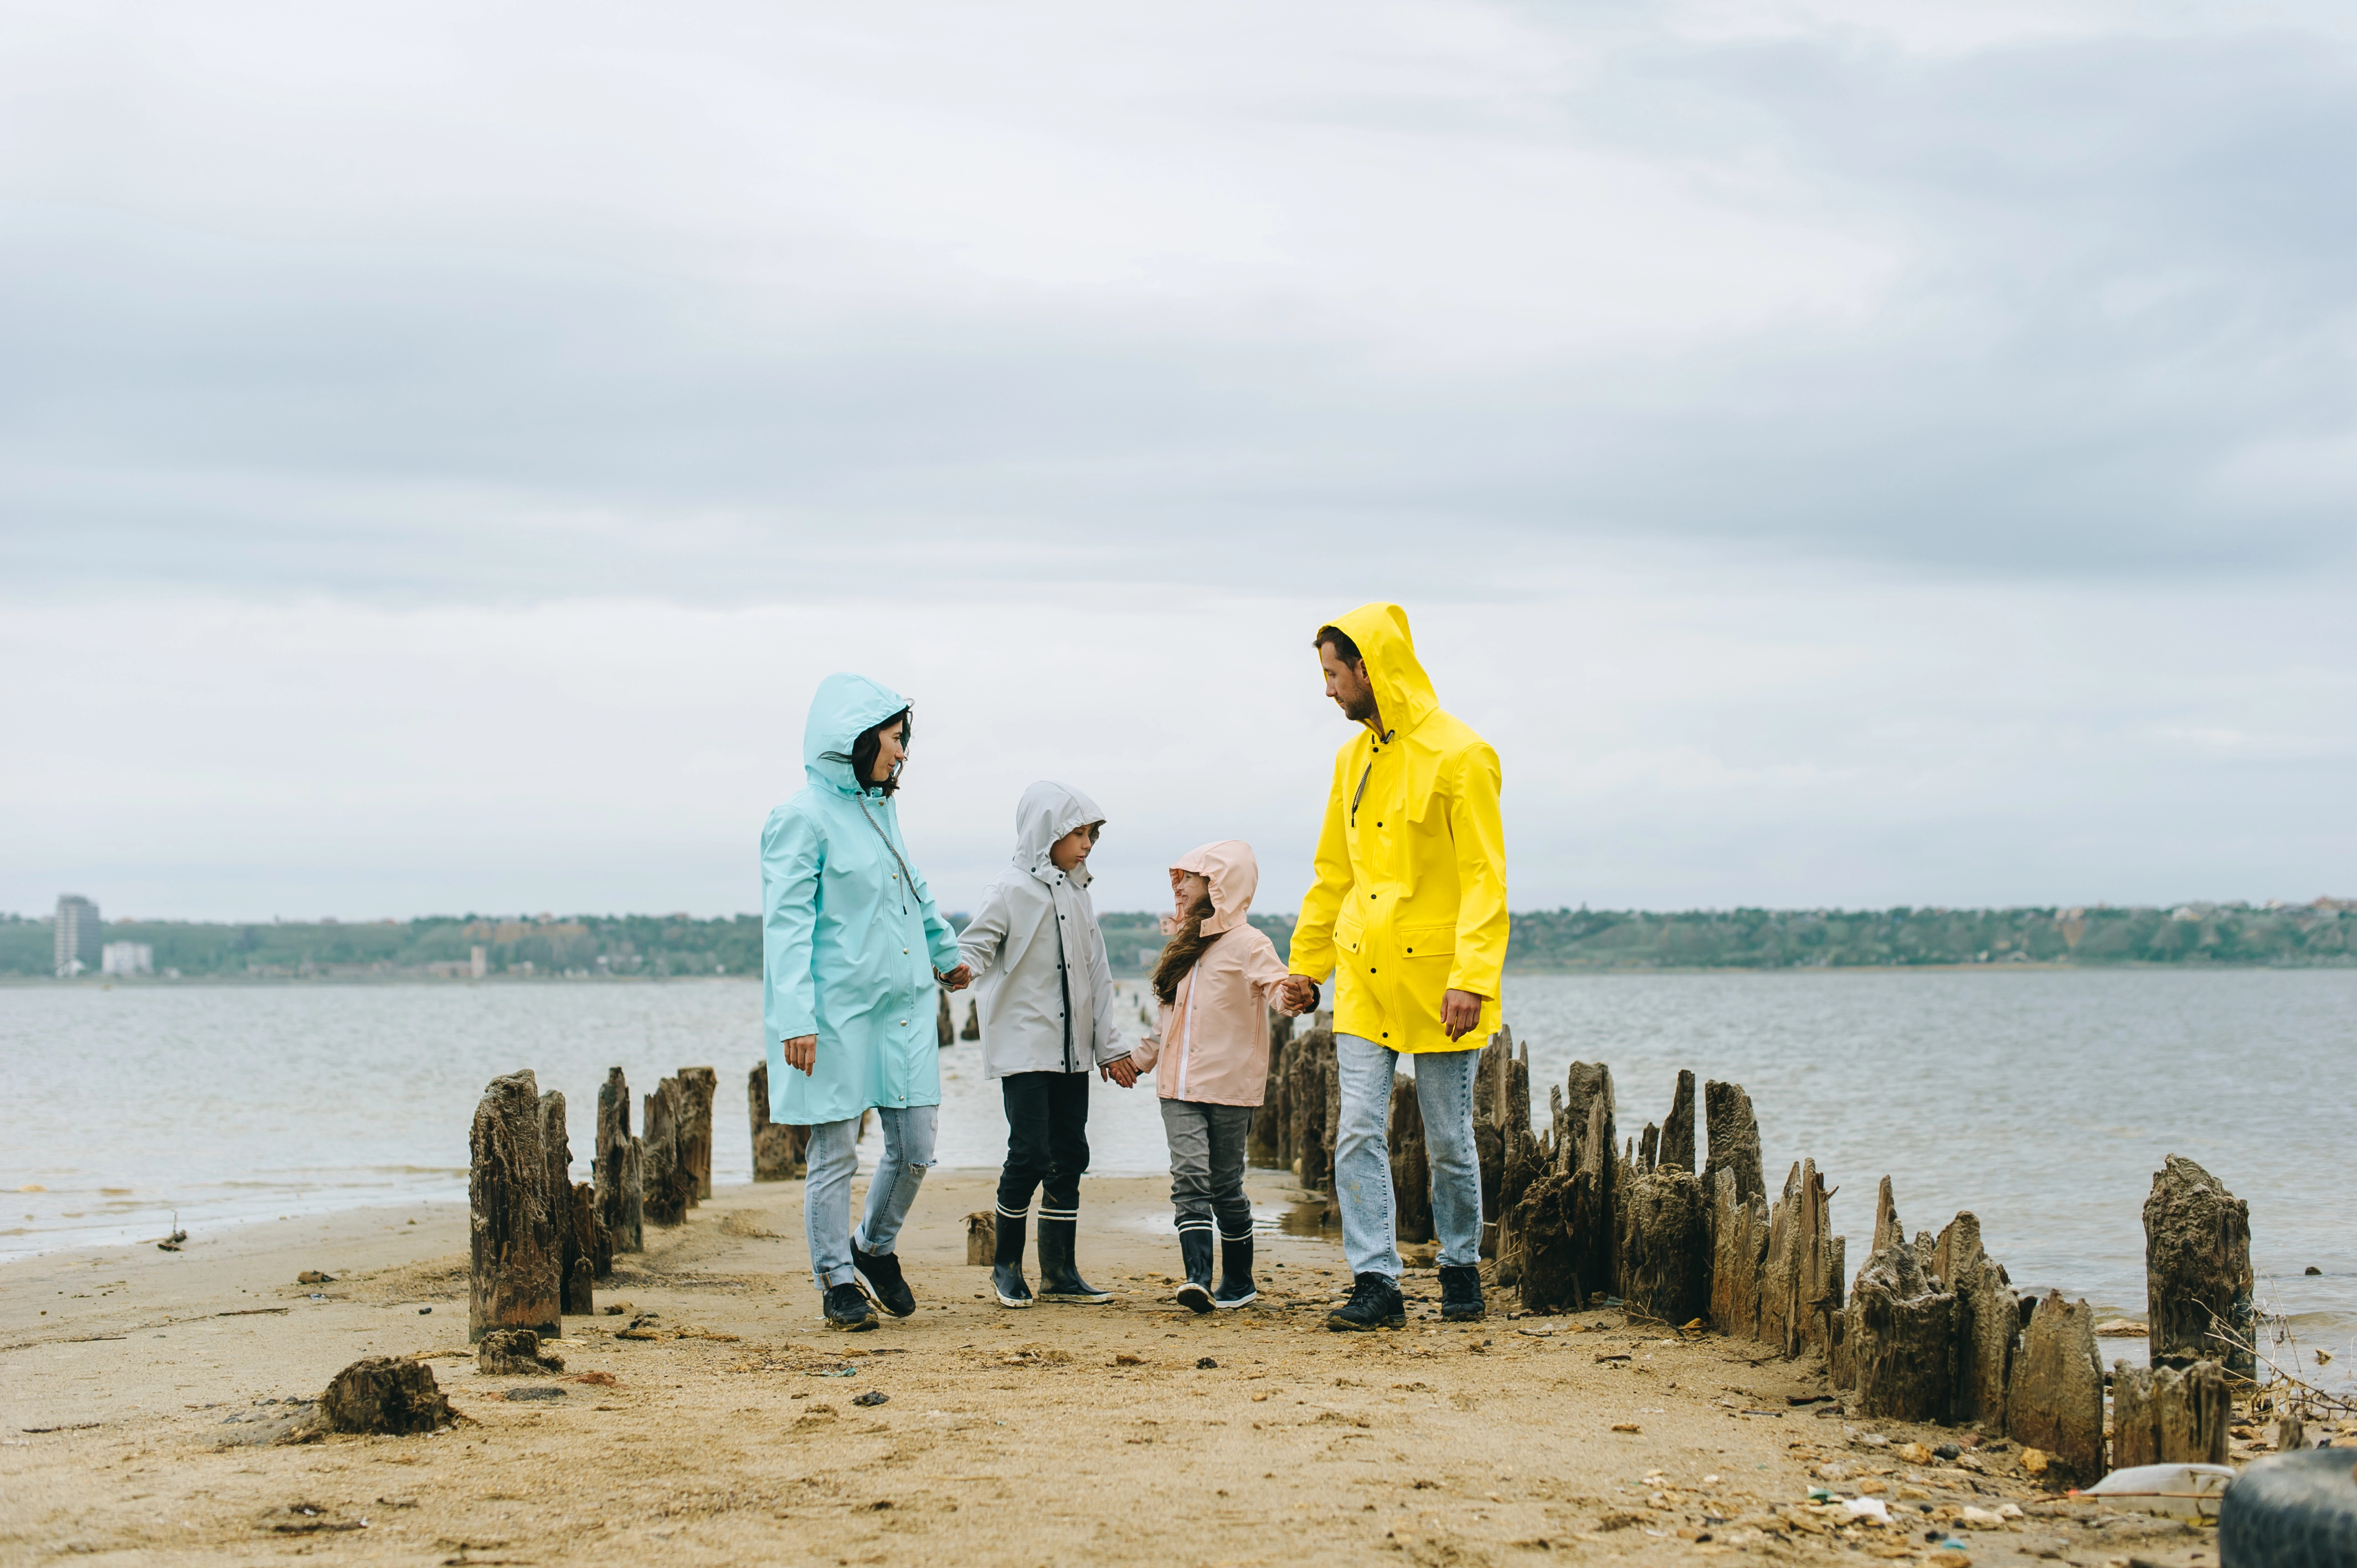 Family at the seaside in bad weather